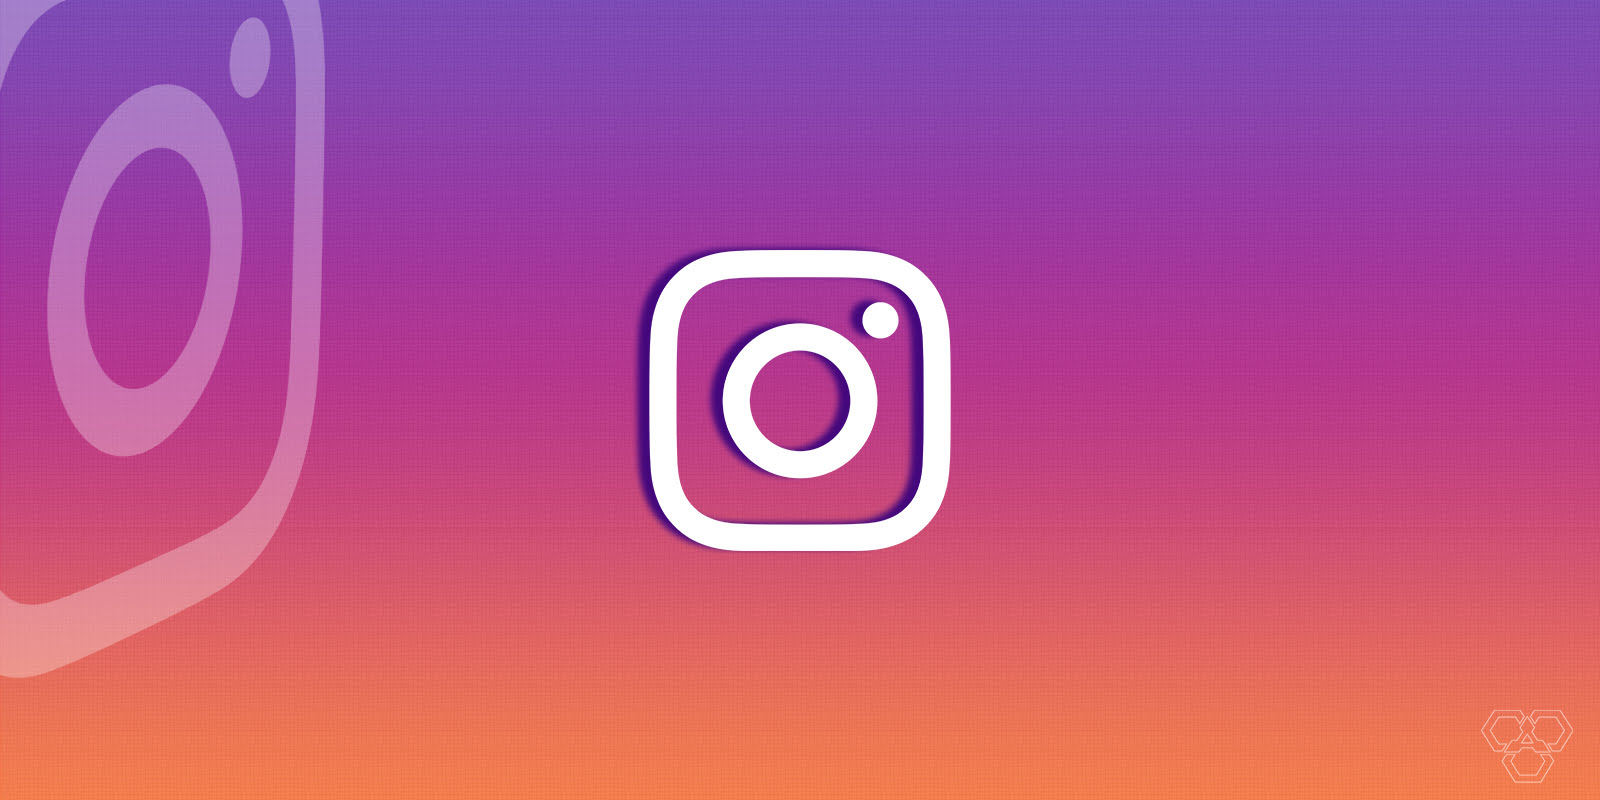 Instagram Discontinues Swipe Up Feature To Access Links